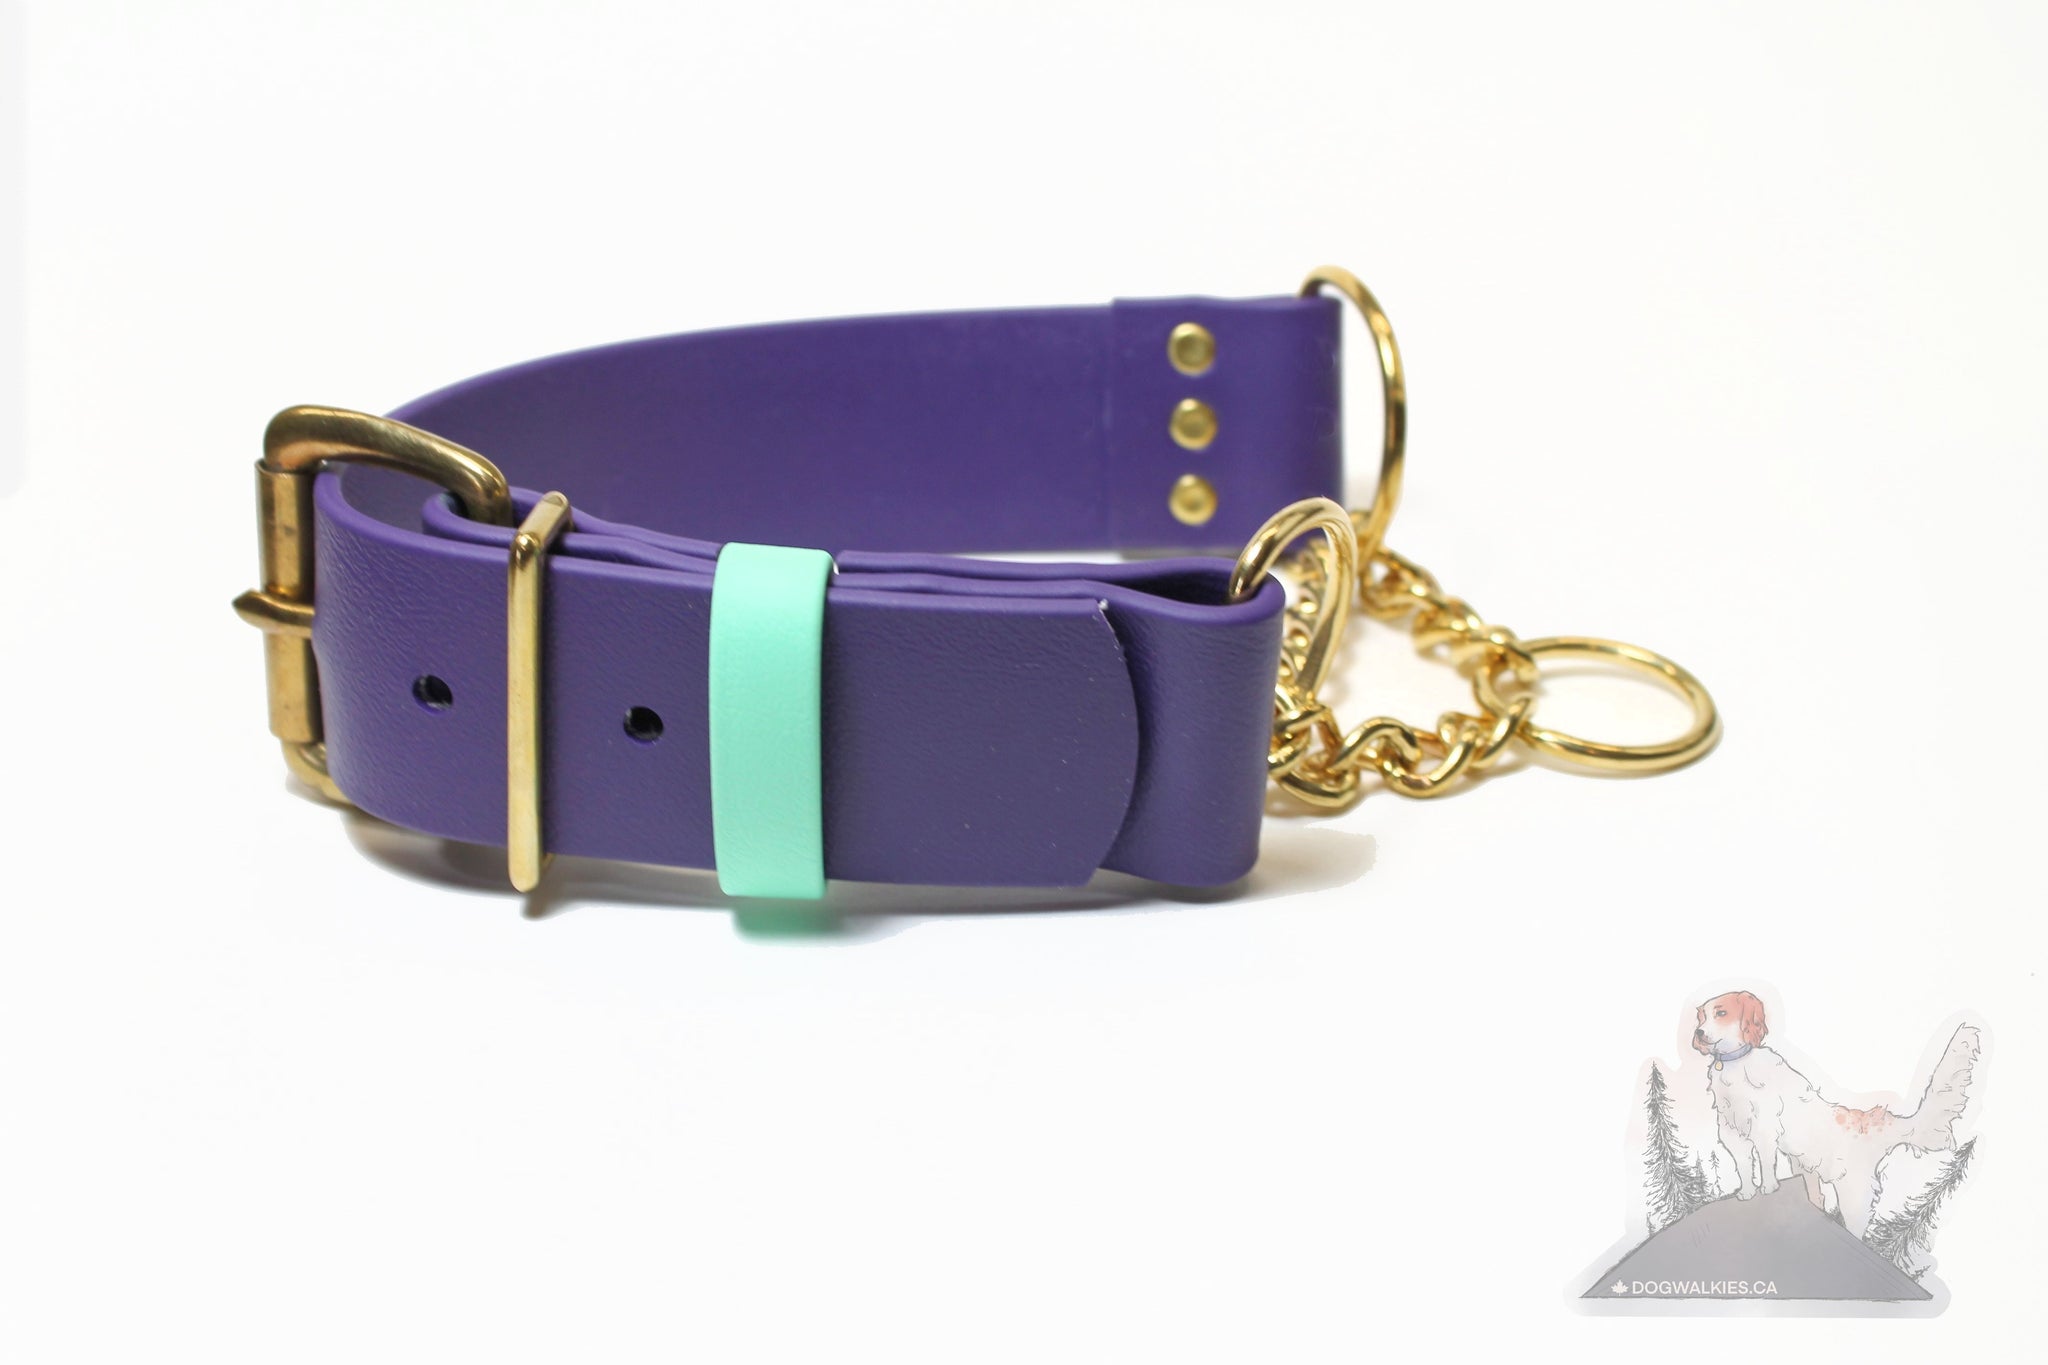 *NEW Wide Biothane Chain Martingale Dog Collar - 1.5" (38mm) wide